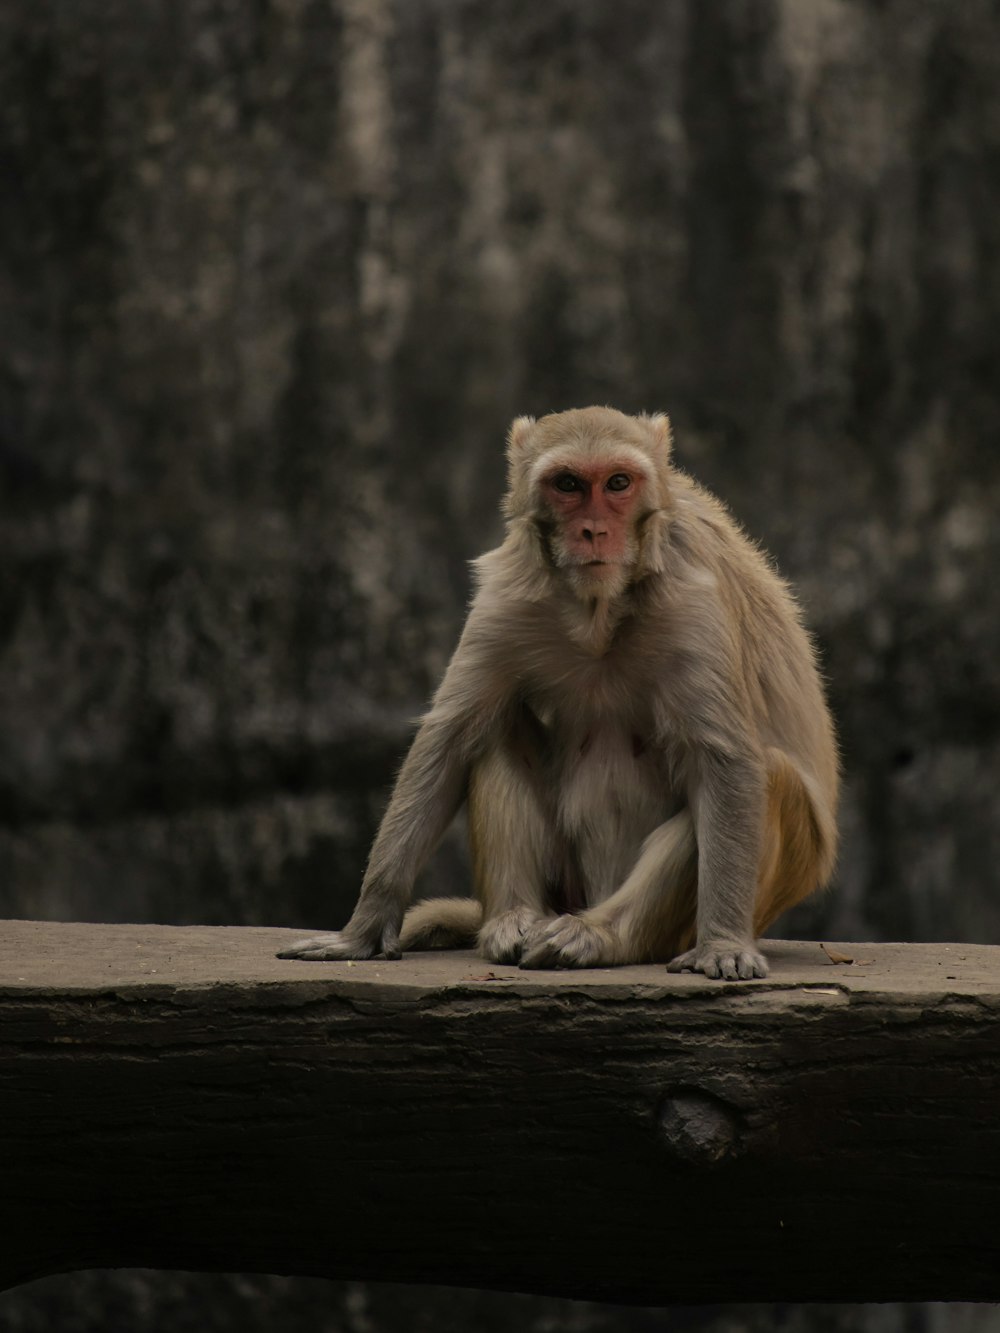 a monkey is sitting on a wooden plank